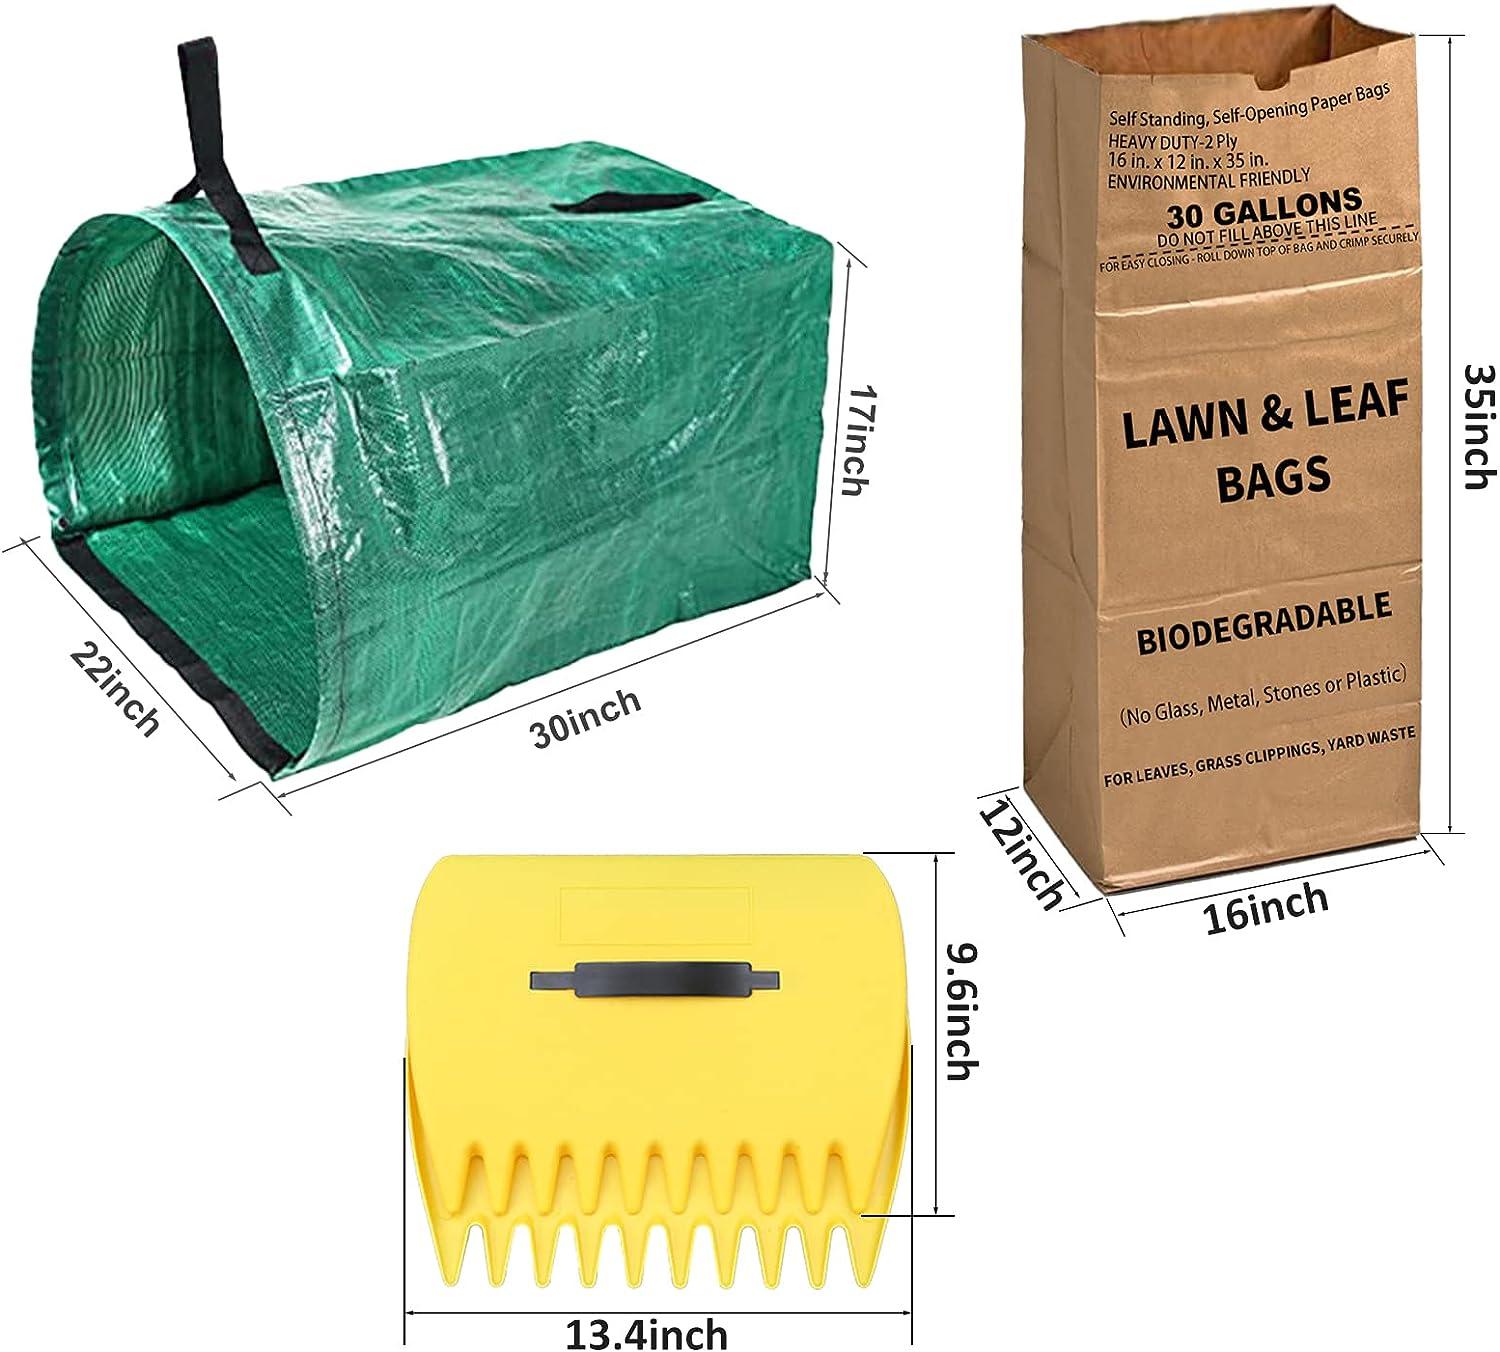  Lawn and Leaf Bags Kit with 5 PCS 30 Gallon Large Kraft Paper  Bags and 2 PCS 132 Gallon Reusable Heavy Duty Garden Bag and Leaf Scoops